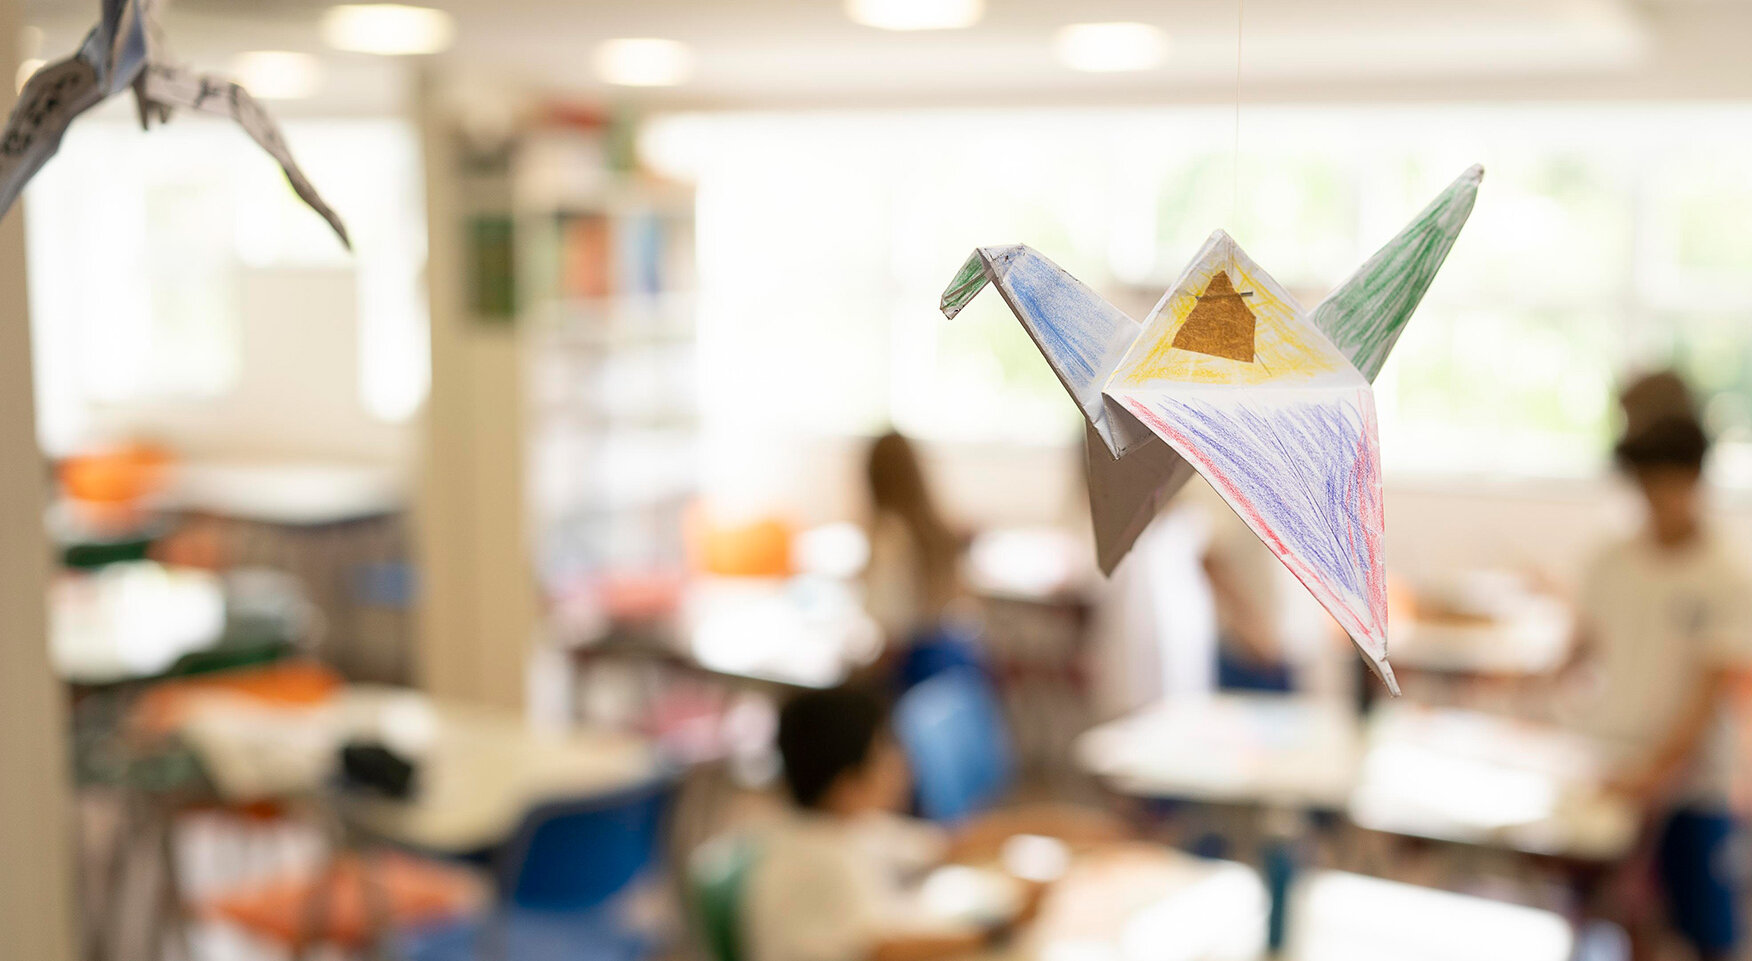 A handmade, painted origami crane hangs in the classroom, which fades into the background.